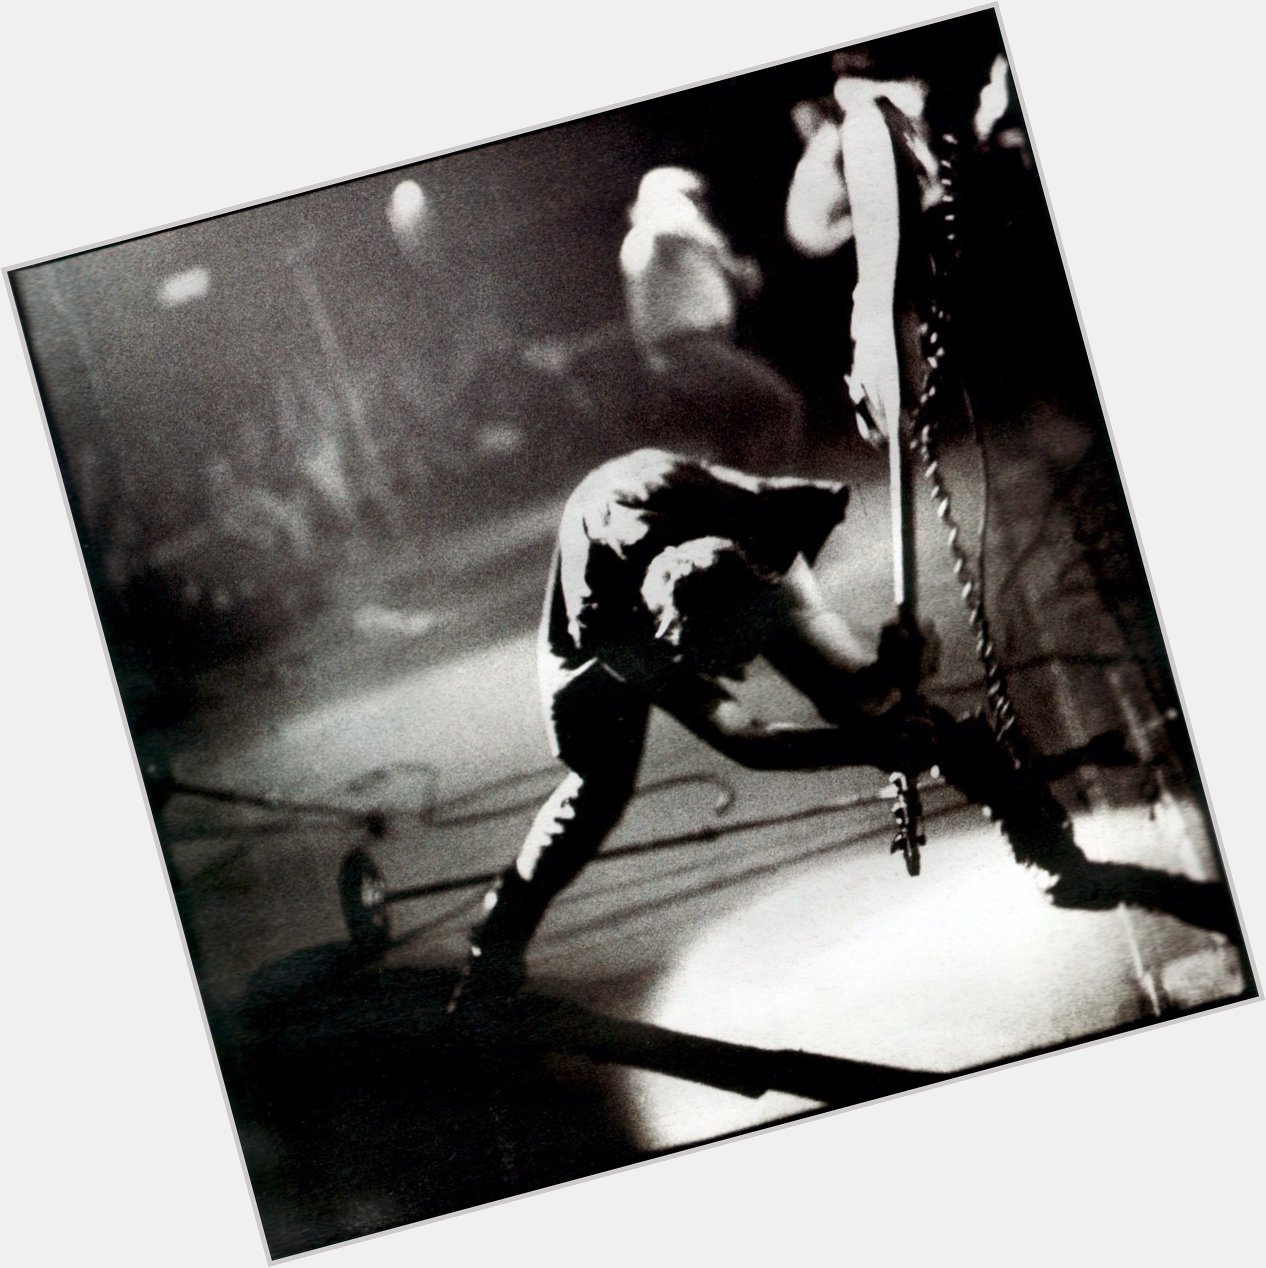 Happy 60th birthday to one of the coolest rock stars of all time Paul Simonon. Absolute legend! 